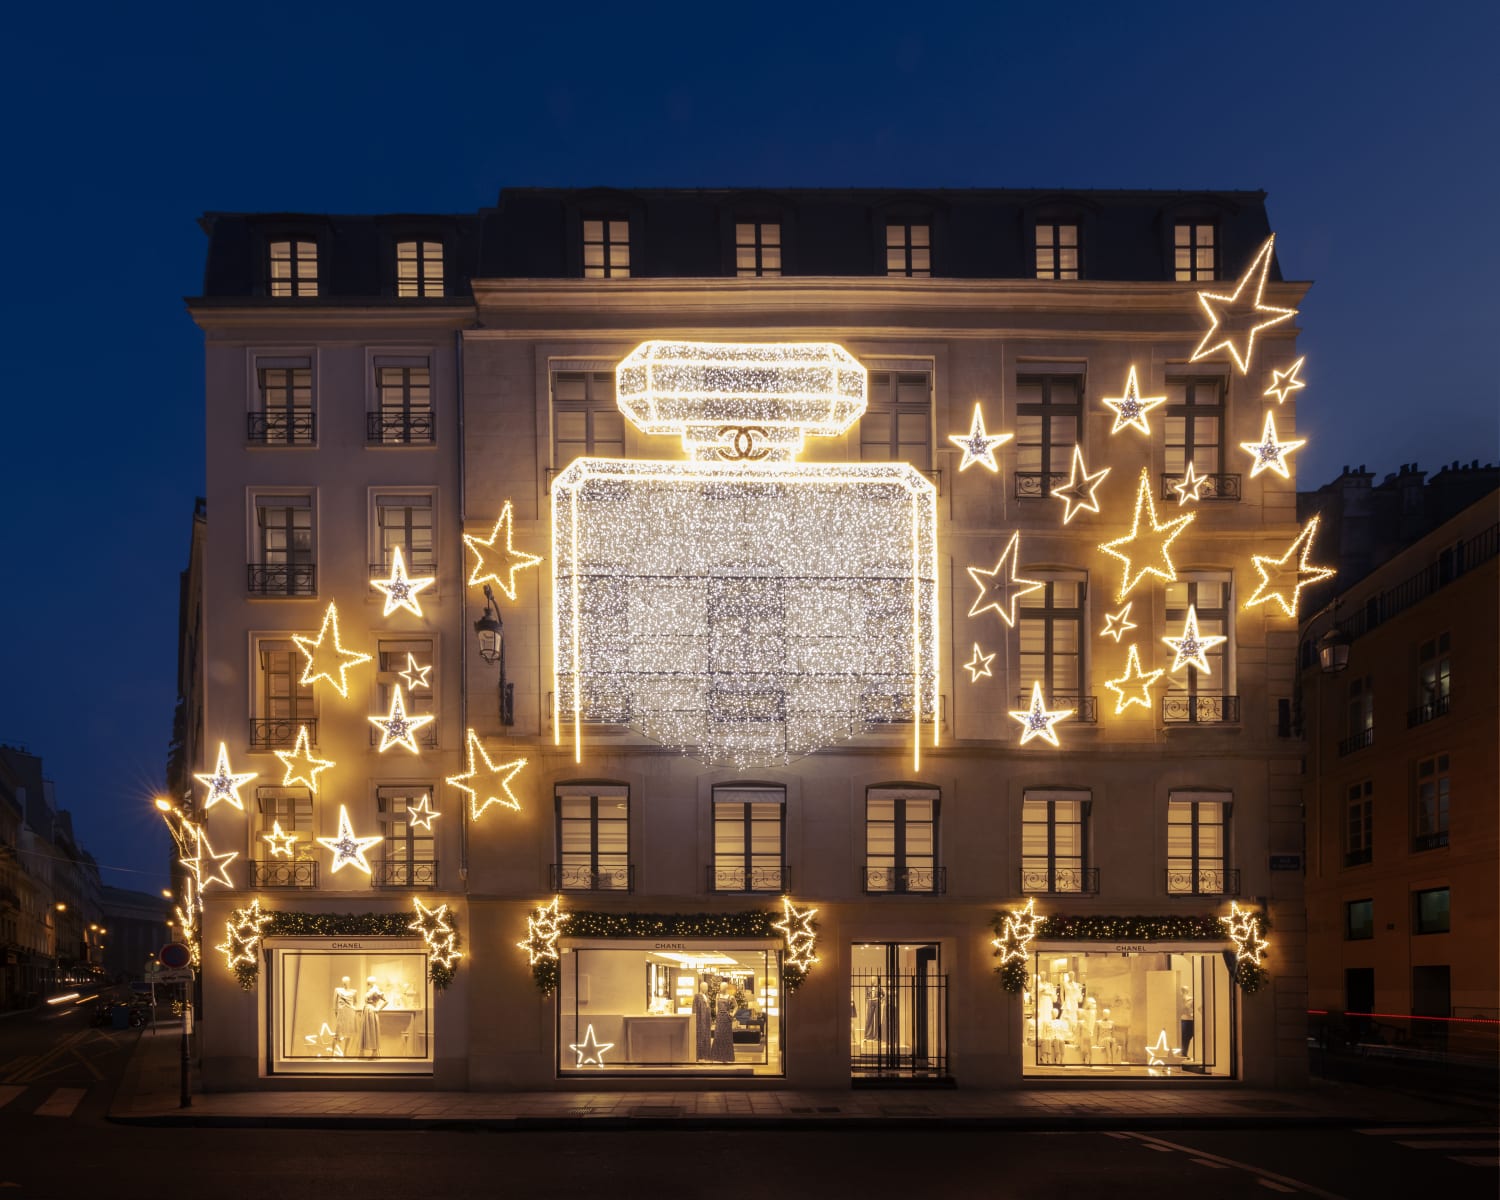 CHANEL boutique at 19 rue Cambon is dressed in decorations - ZOE Magazine